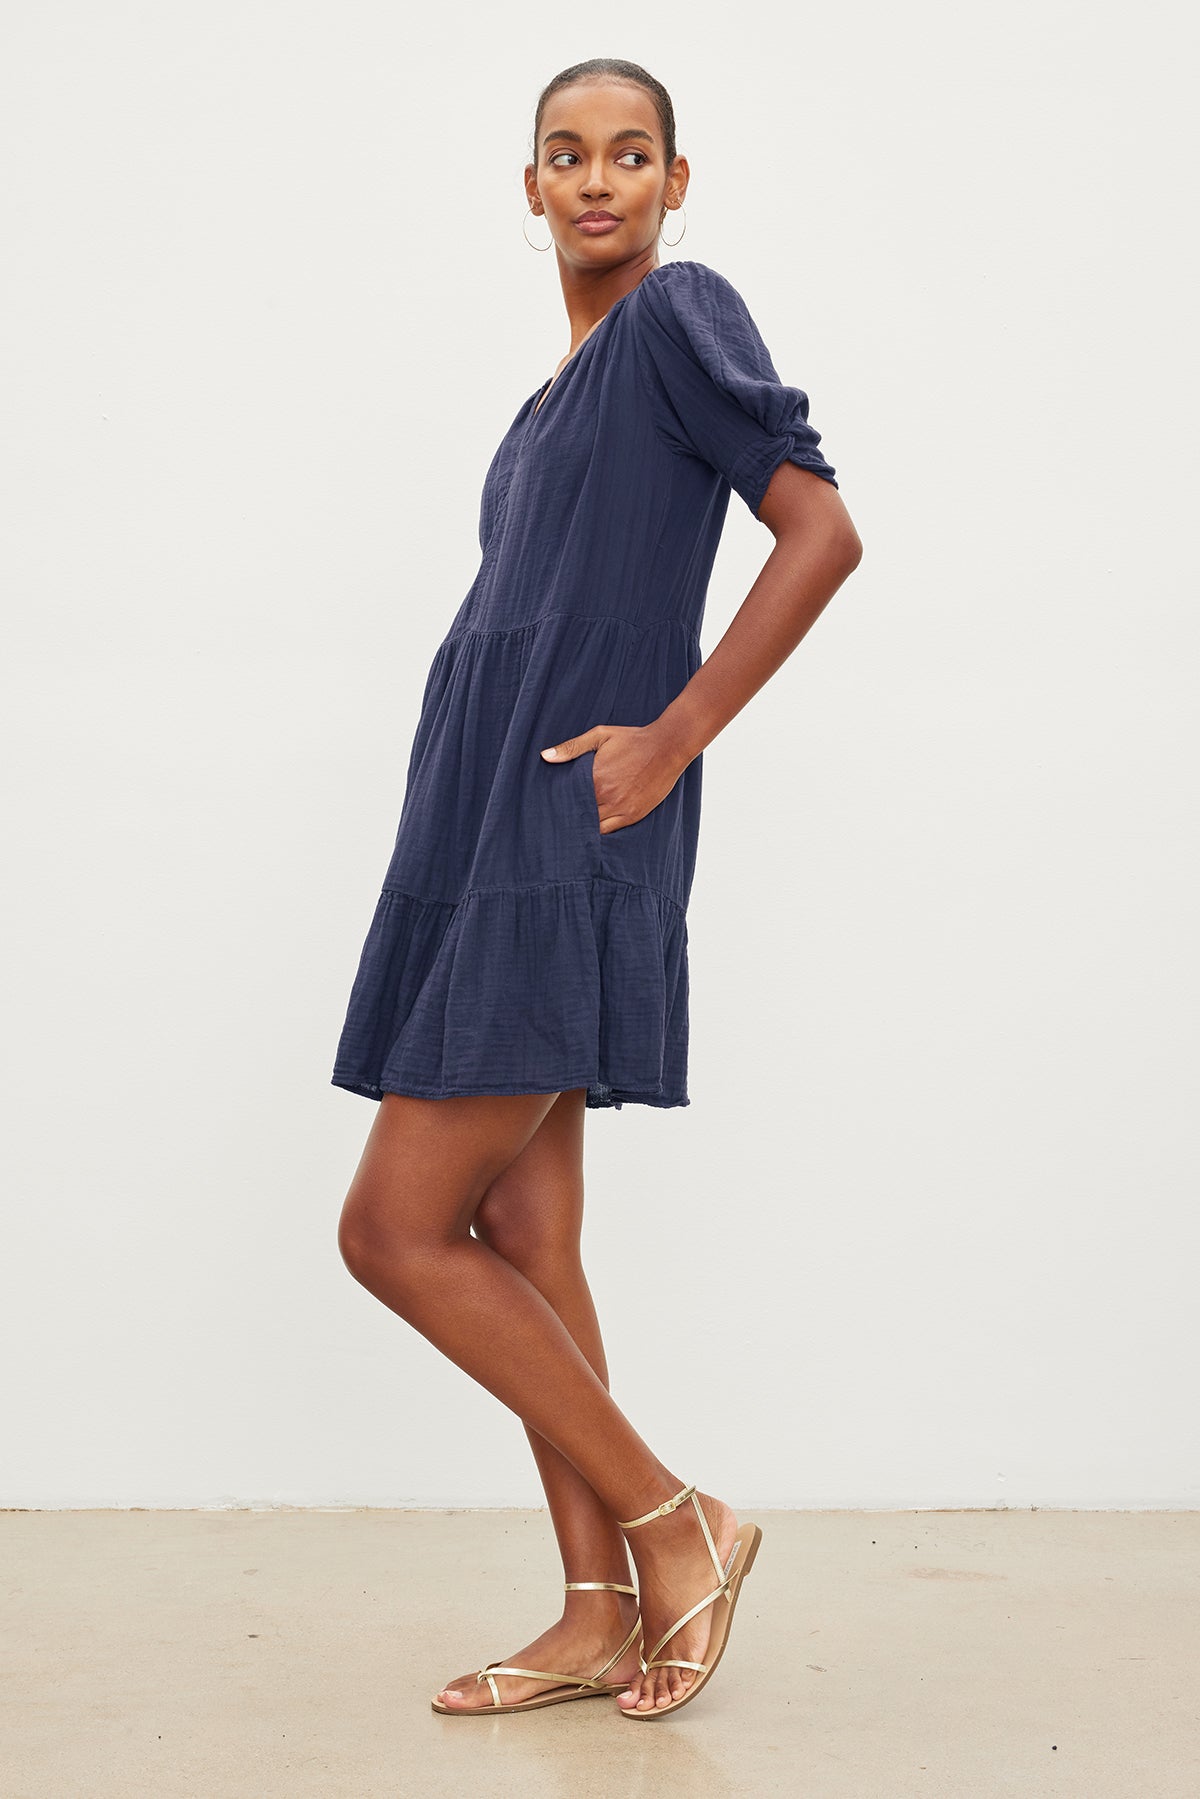 A person stands sideways against a plain background, wearing a navy blue BELLA COTTON GAUZE DRESS by Velvet by Graham & Spencer and gold sandals.-37355941658817